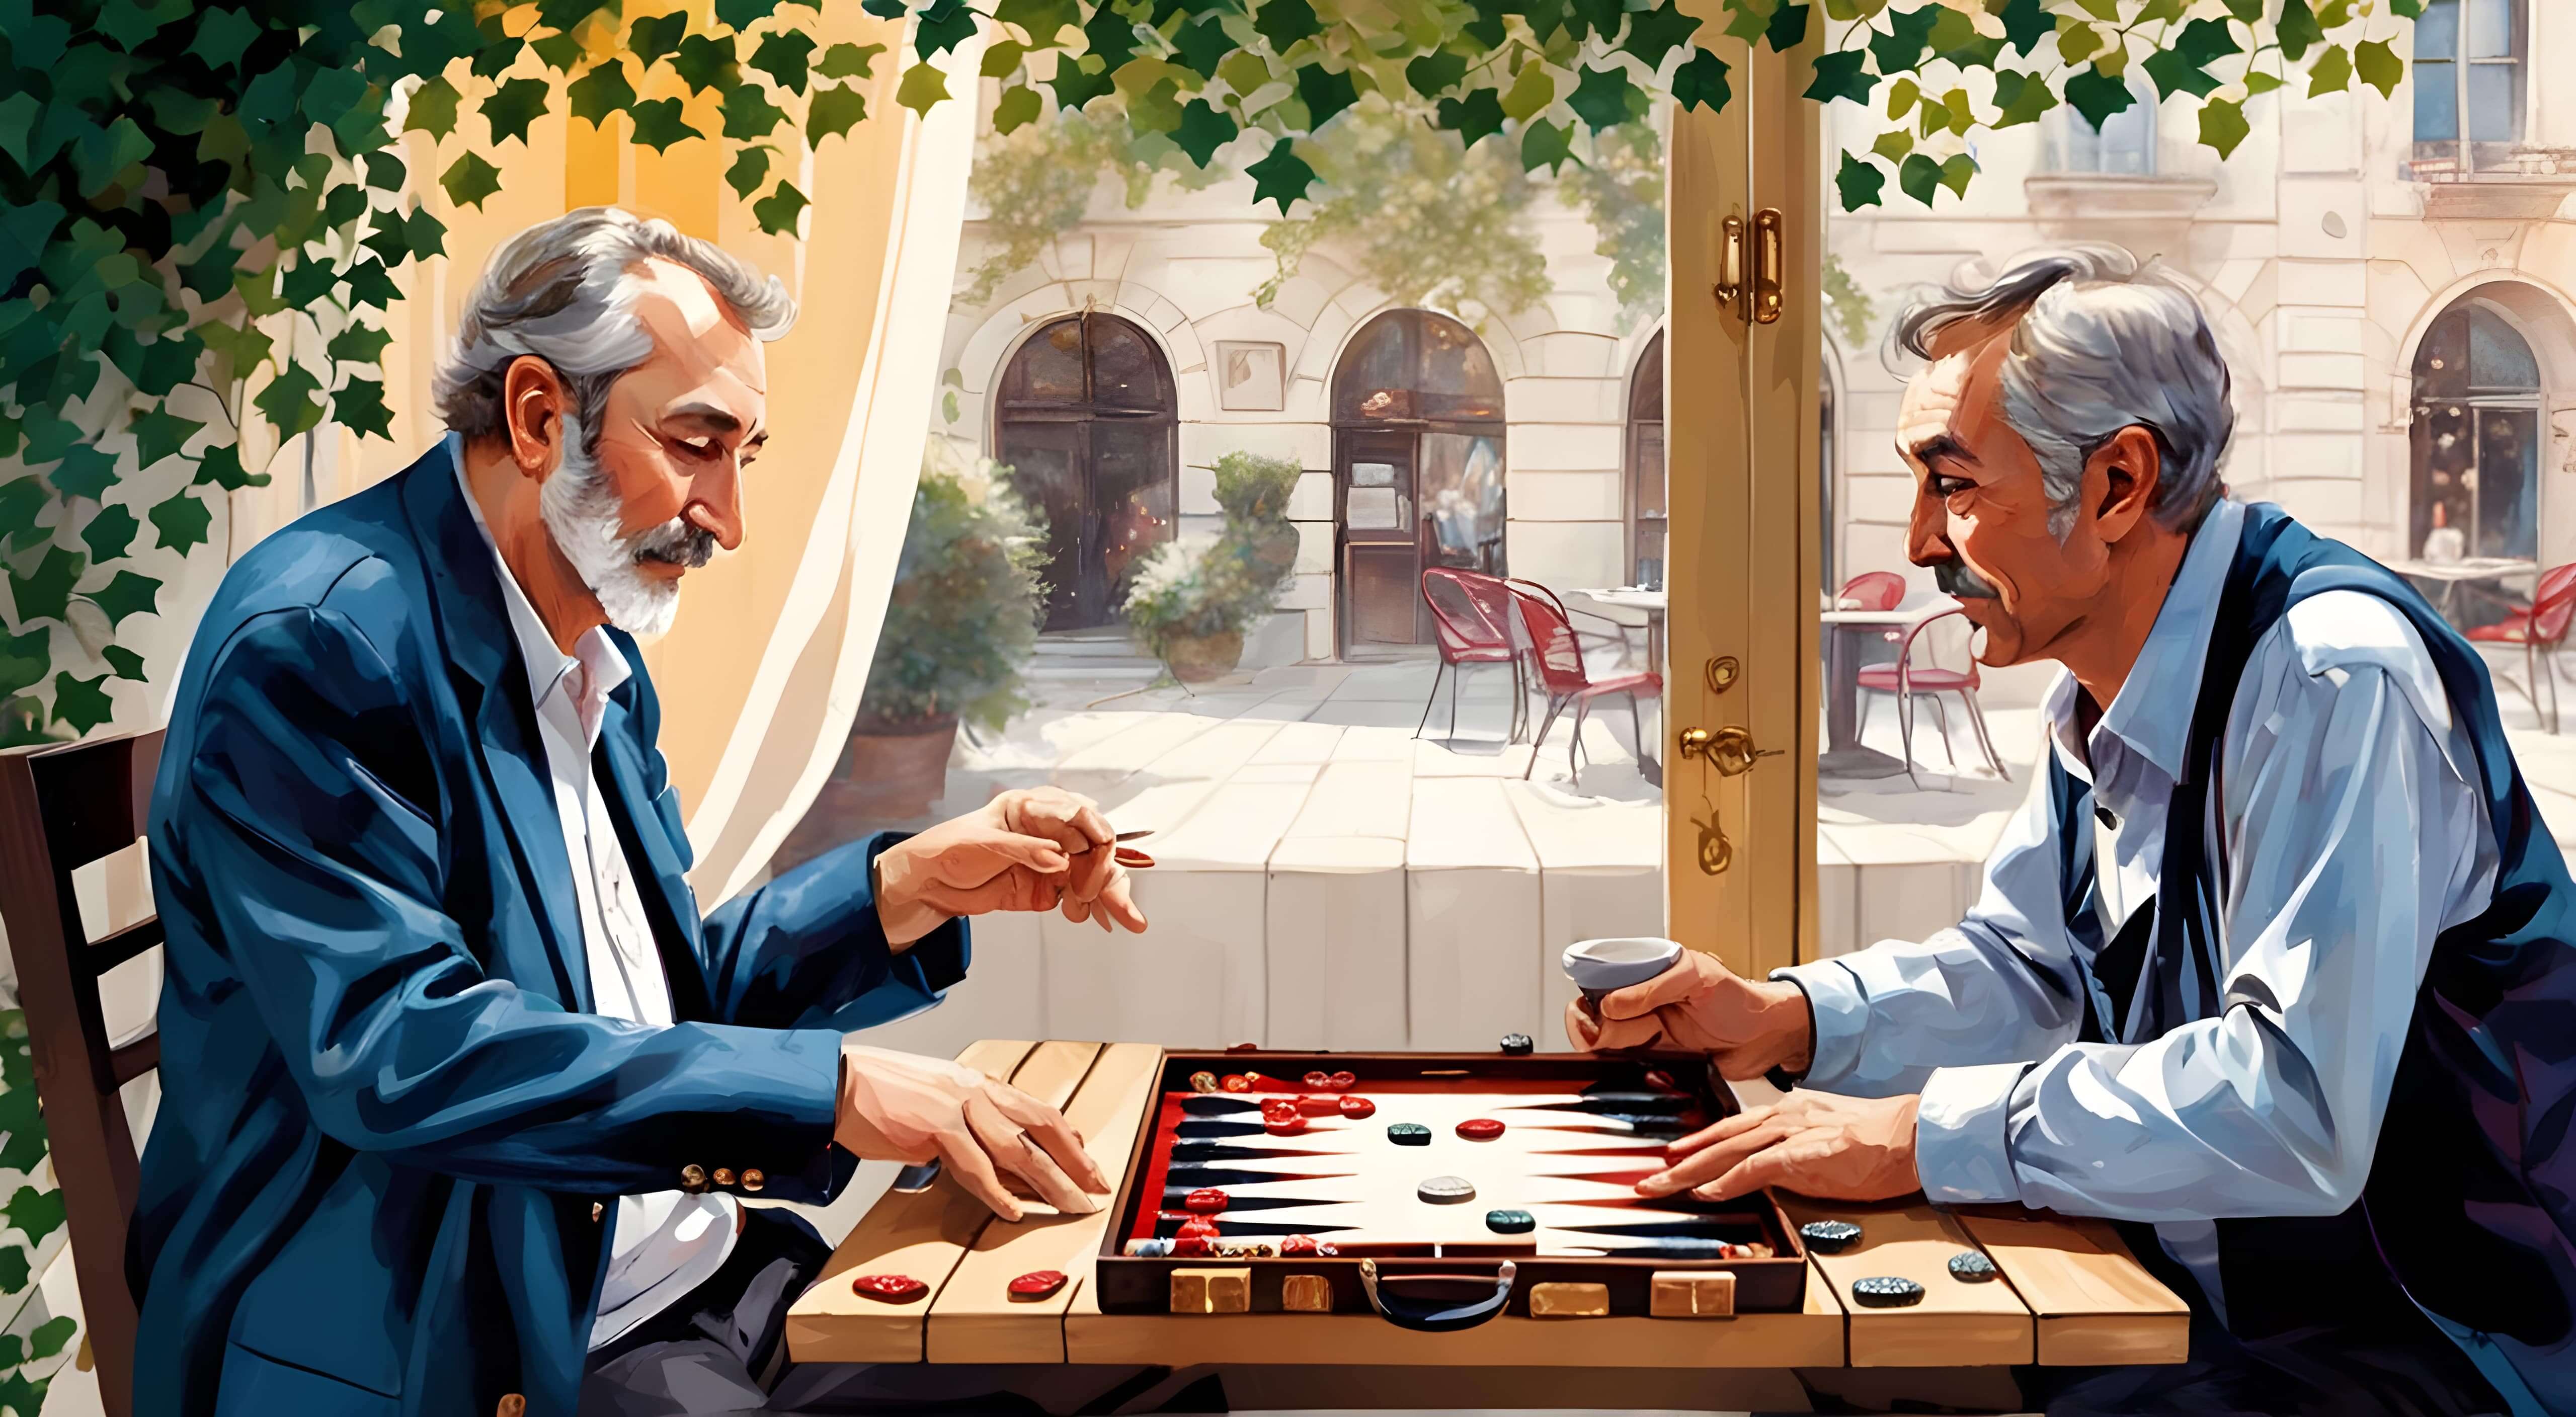 media-2d-illustration-a-charming-scene-of-a-50-year-old-man-immersed-in-a-backgammon-game-with-a-friend-at-751362312-1